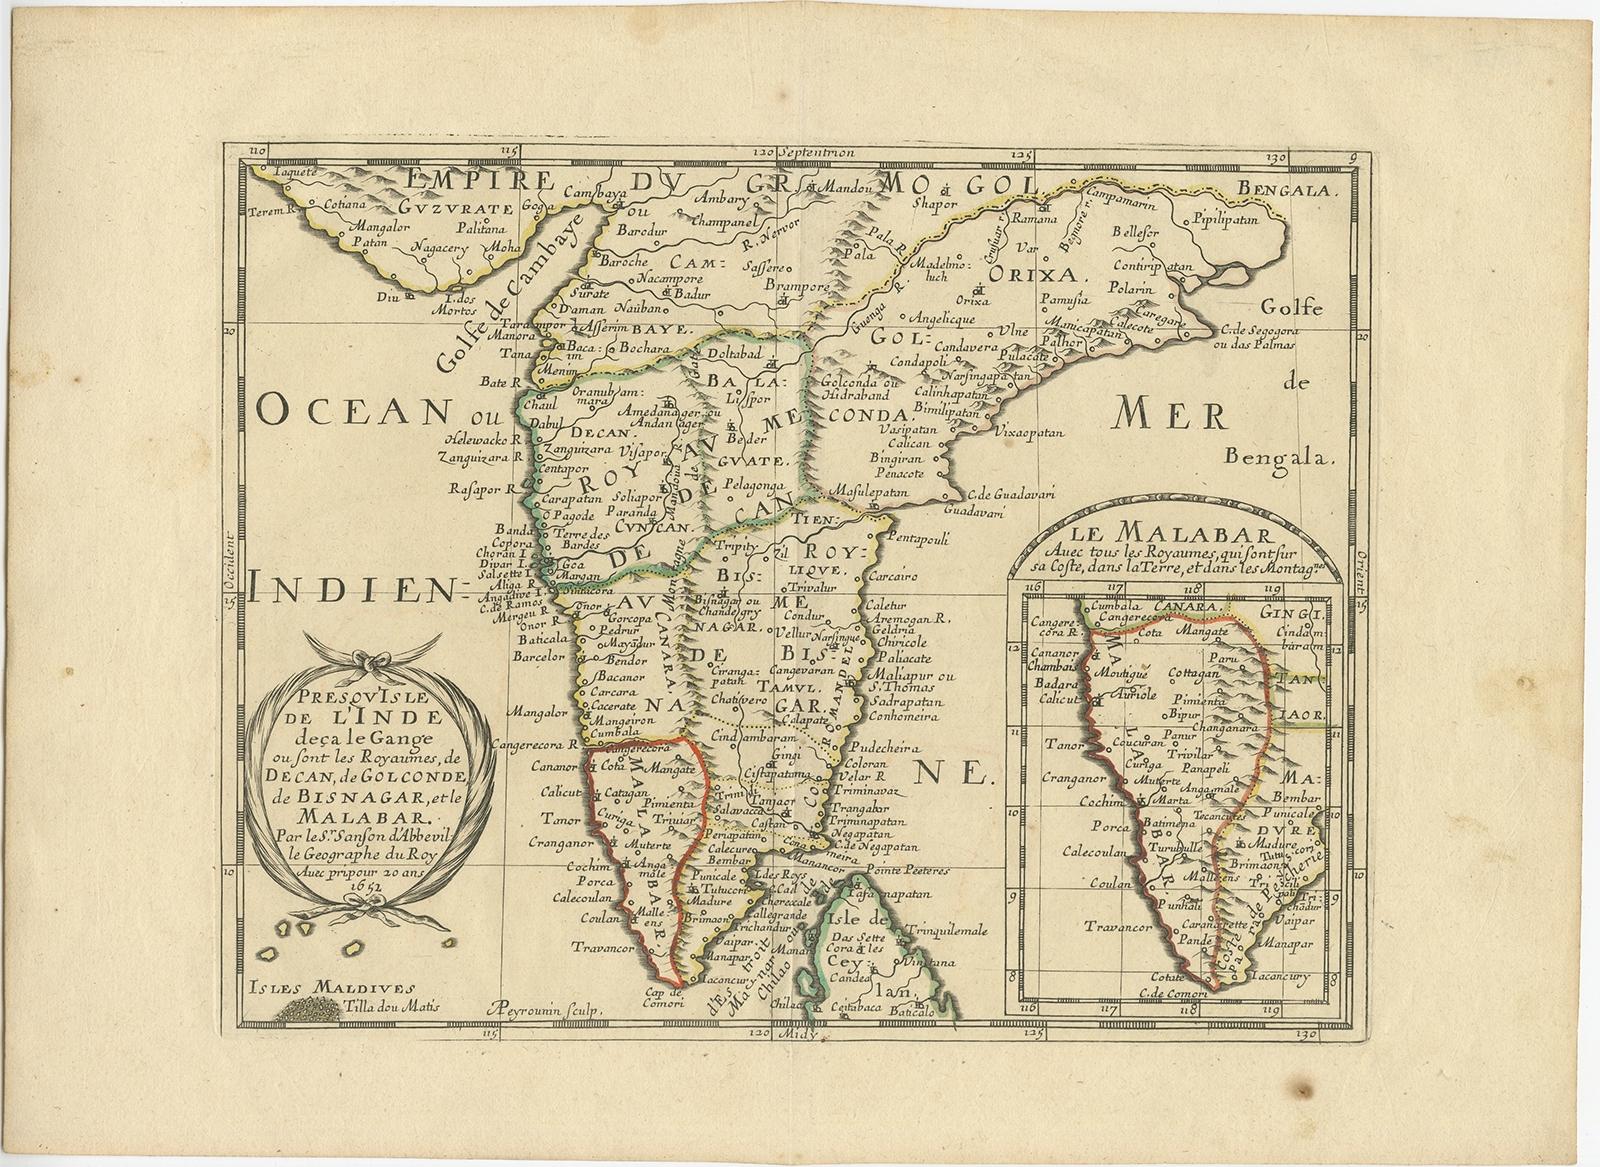 Antique map titled 'Presqu'Isle de l'Inde deca le Gange (..)'. 

Old map showing the southern part of India, including the northern part of Sri Lanka. With inset map of Southern India (Malabar). This map covers the subcontinent from the Bay of